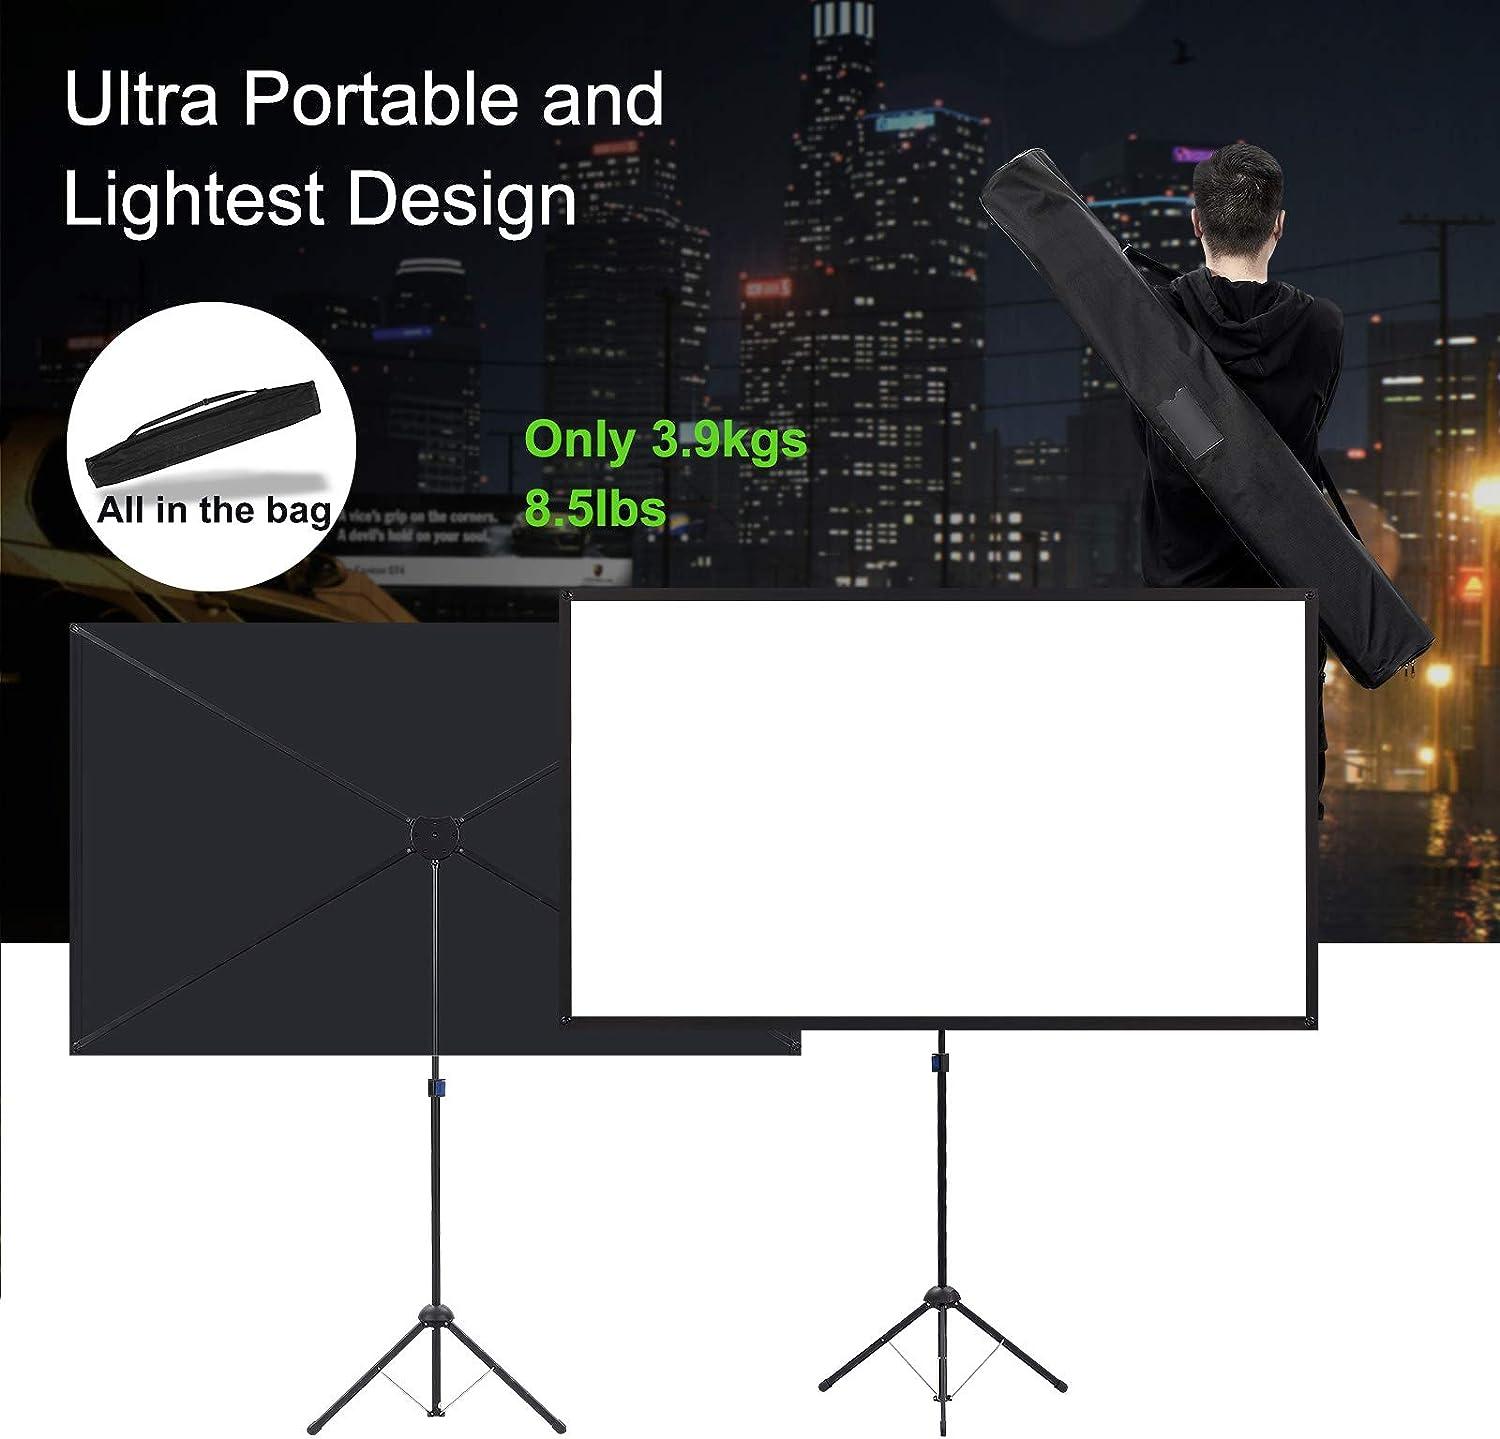 Projector Screen with Stand, Outdoor Projector Screen 80 Inch 16:9 - Massive Discounts